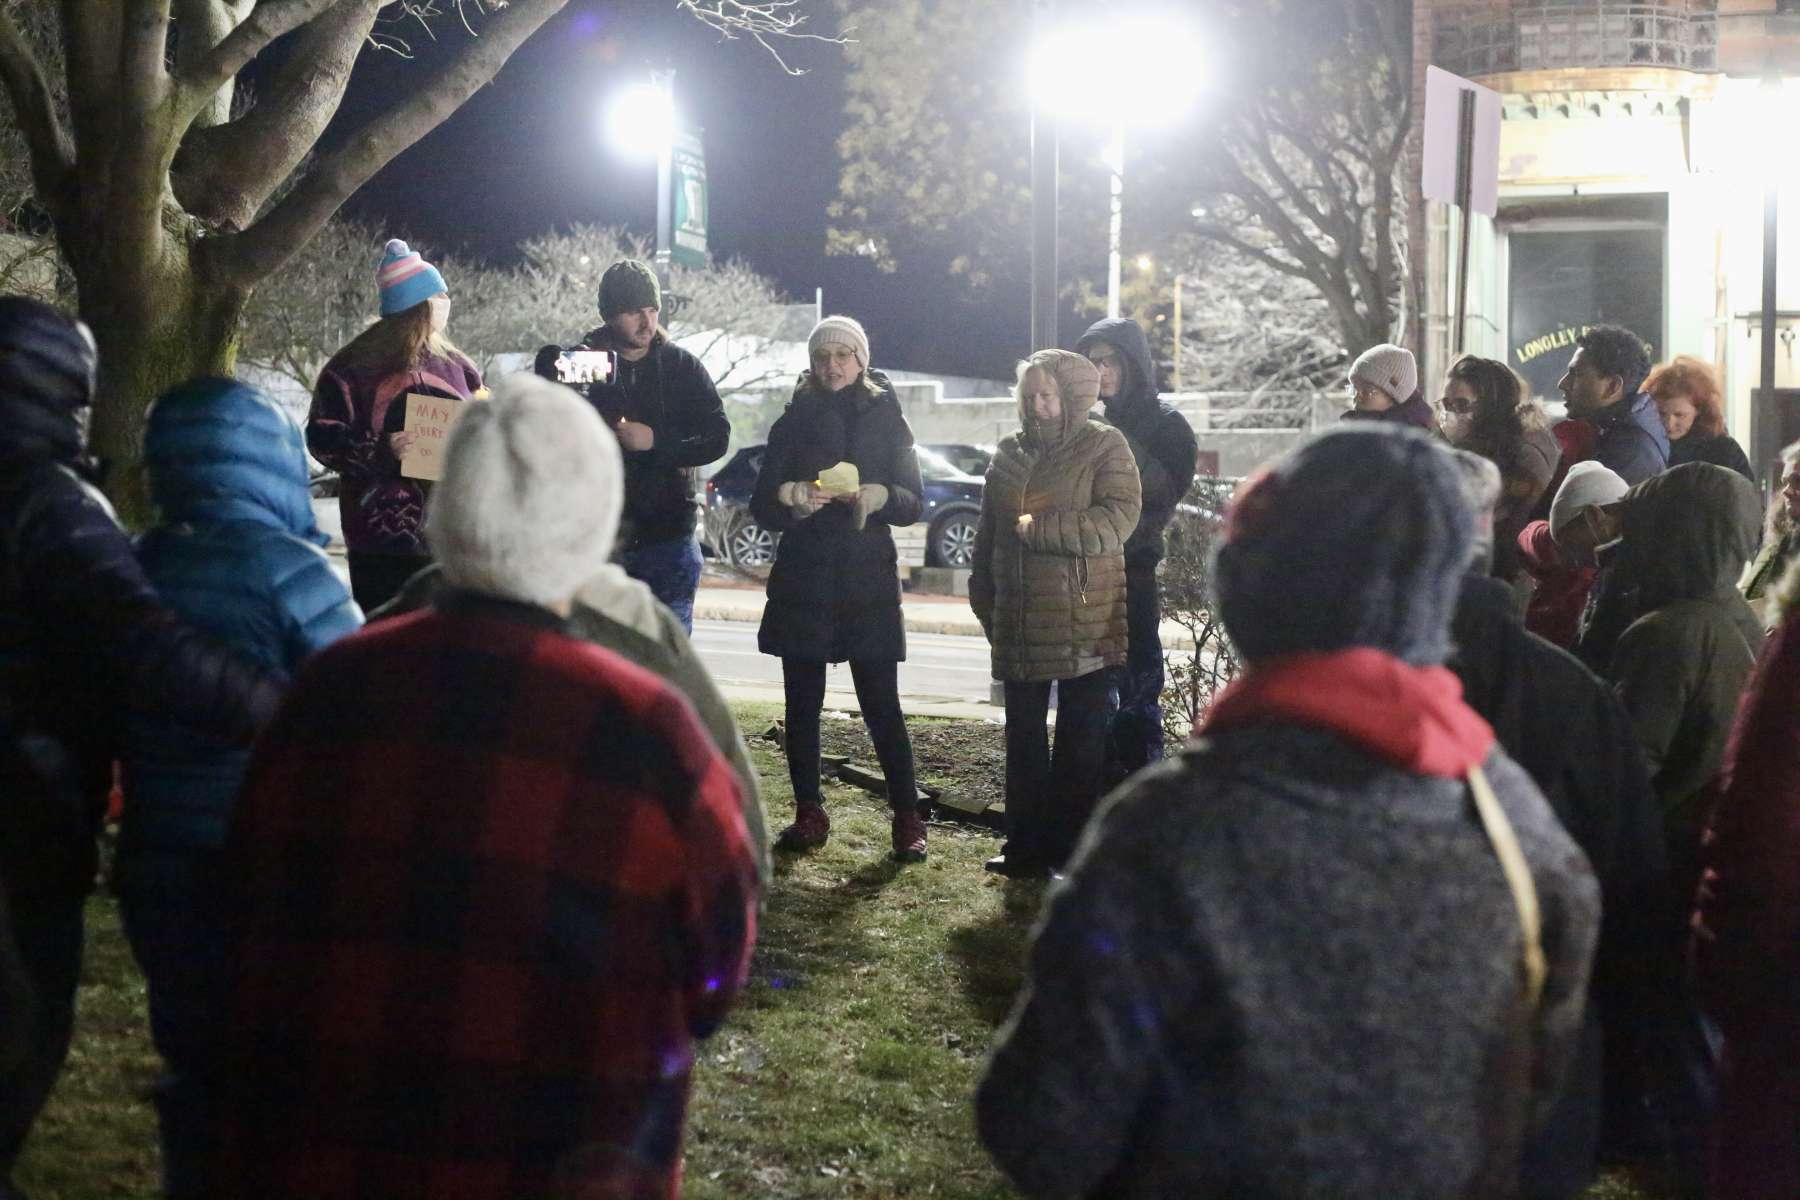 Remembering Allen Charette, who died alone and unhoused in Woonsocket